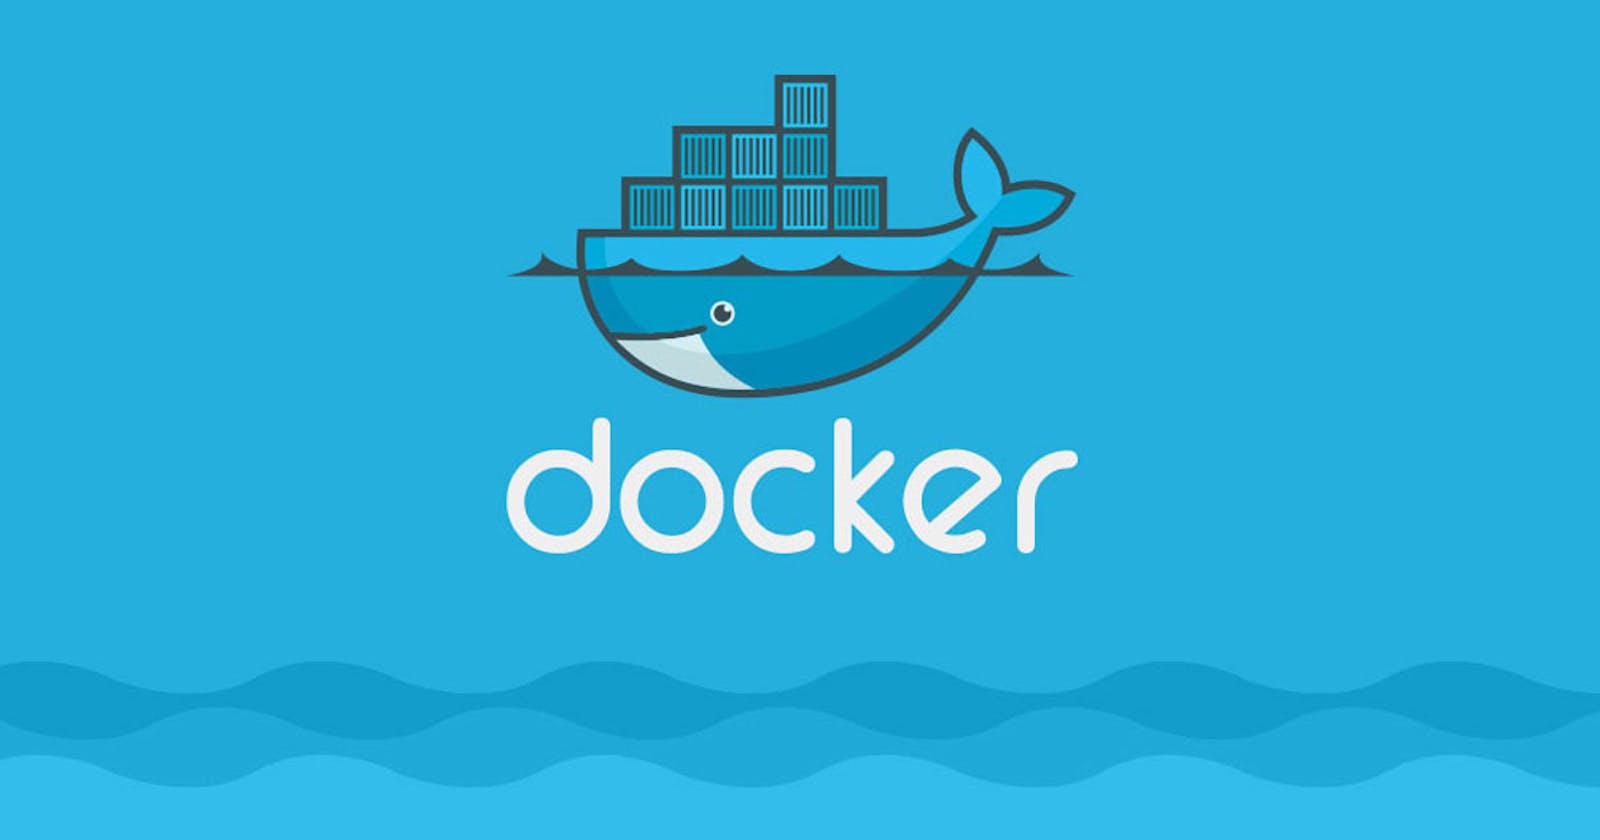 GUI Container on the Docker